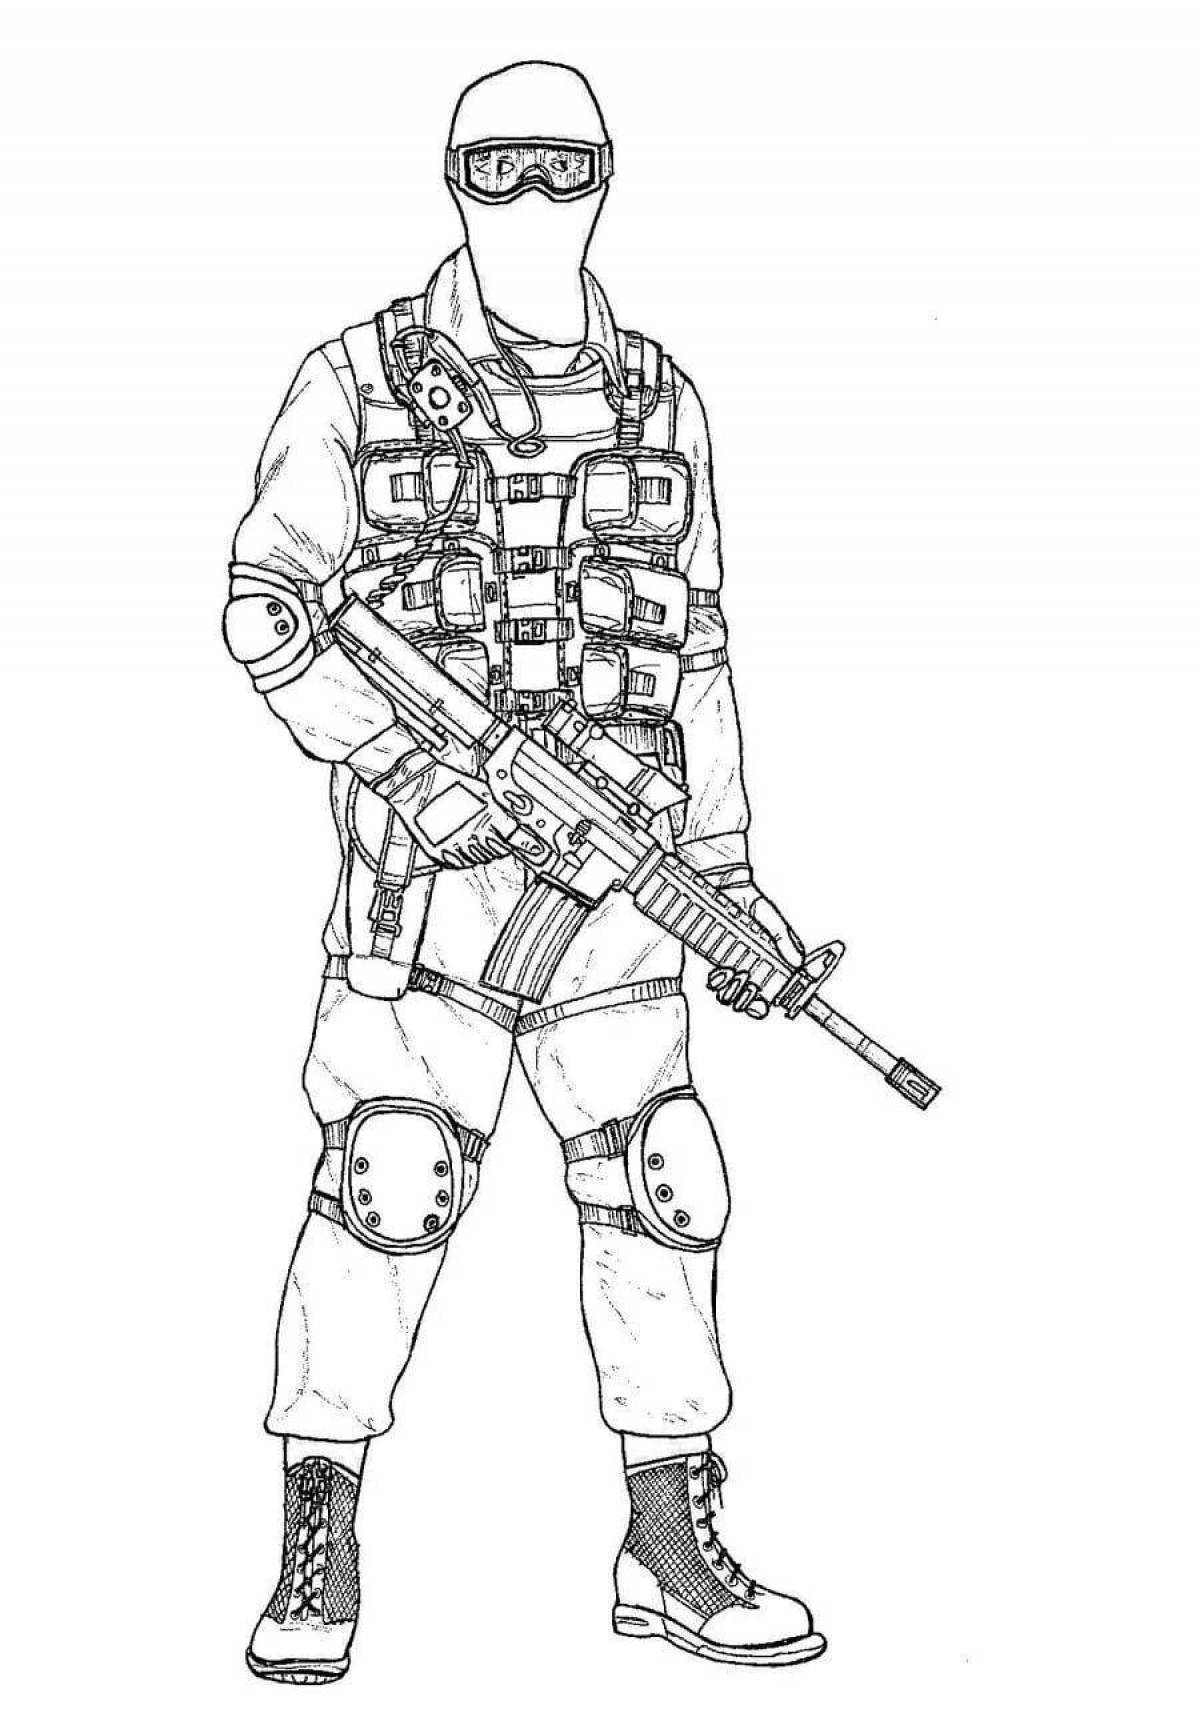 Special forces coloring page for boys